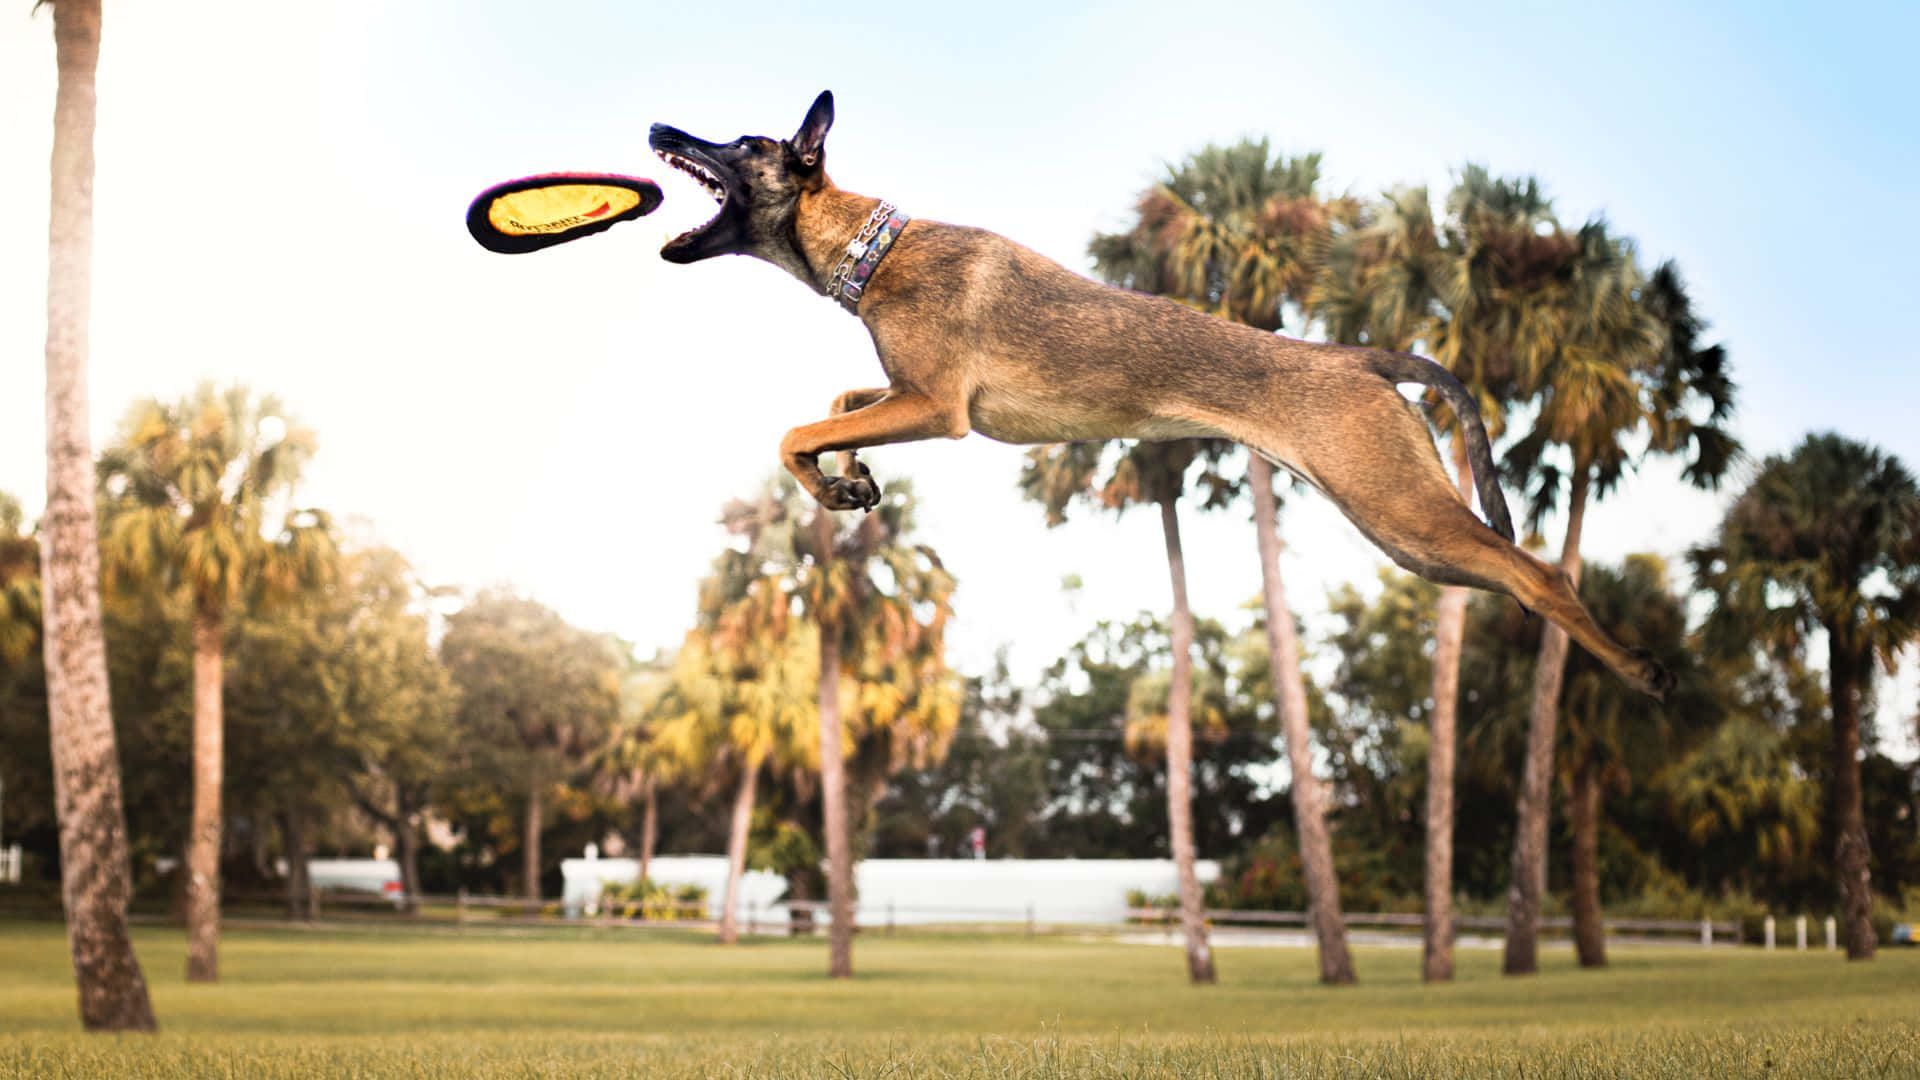 A bright and eye-catching Frisbee flying through the air